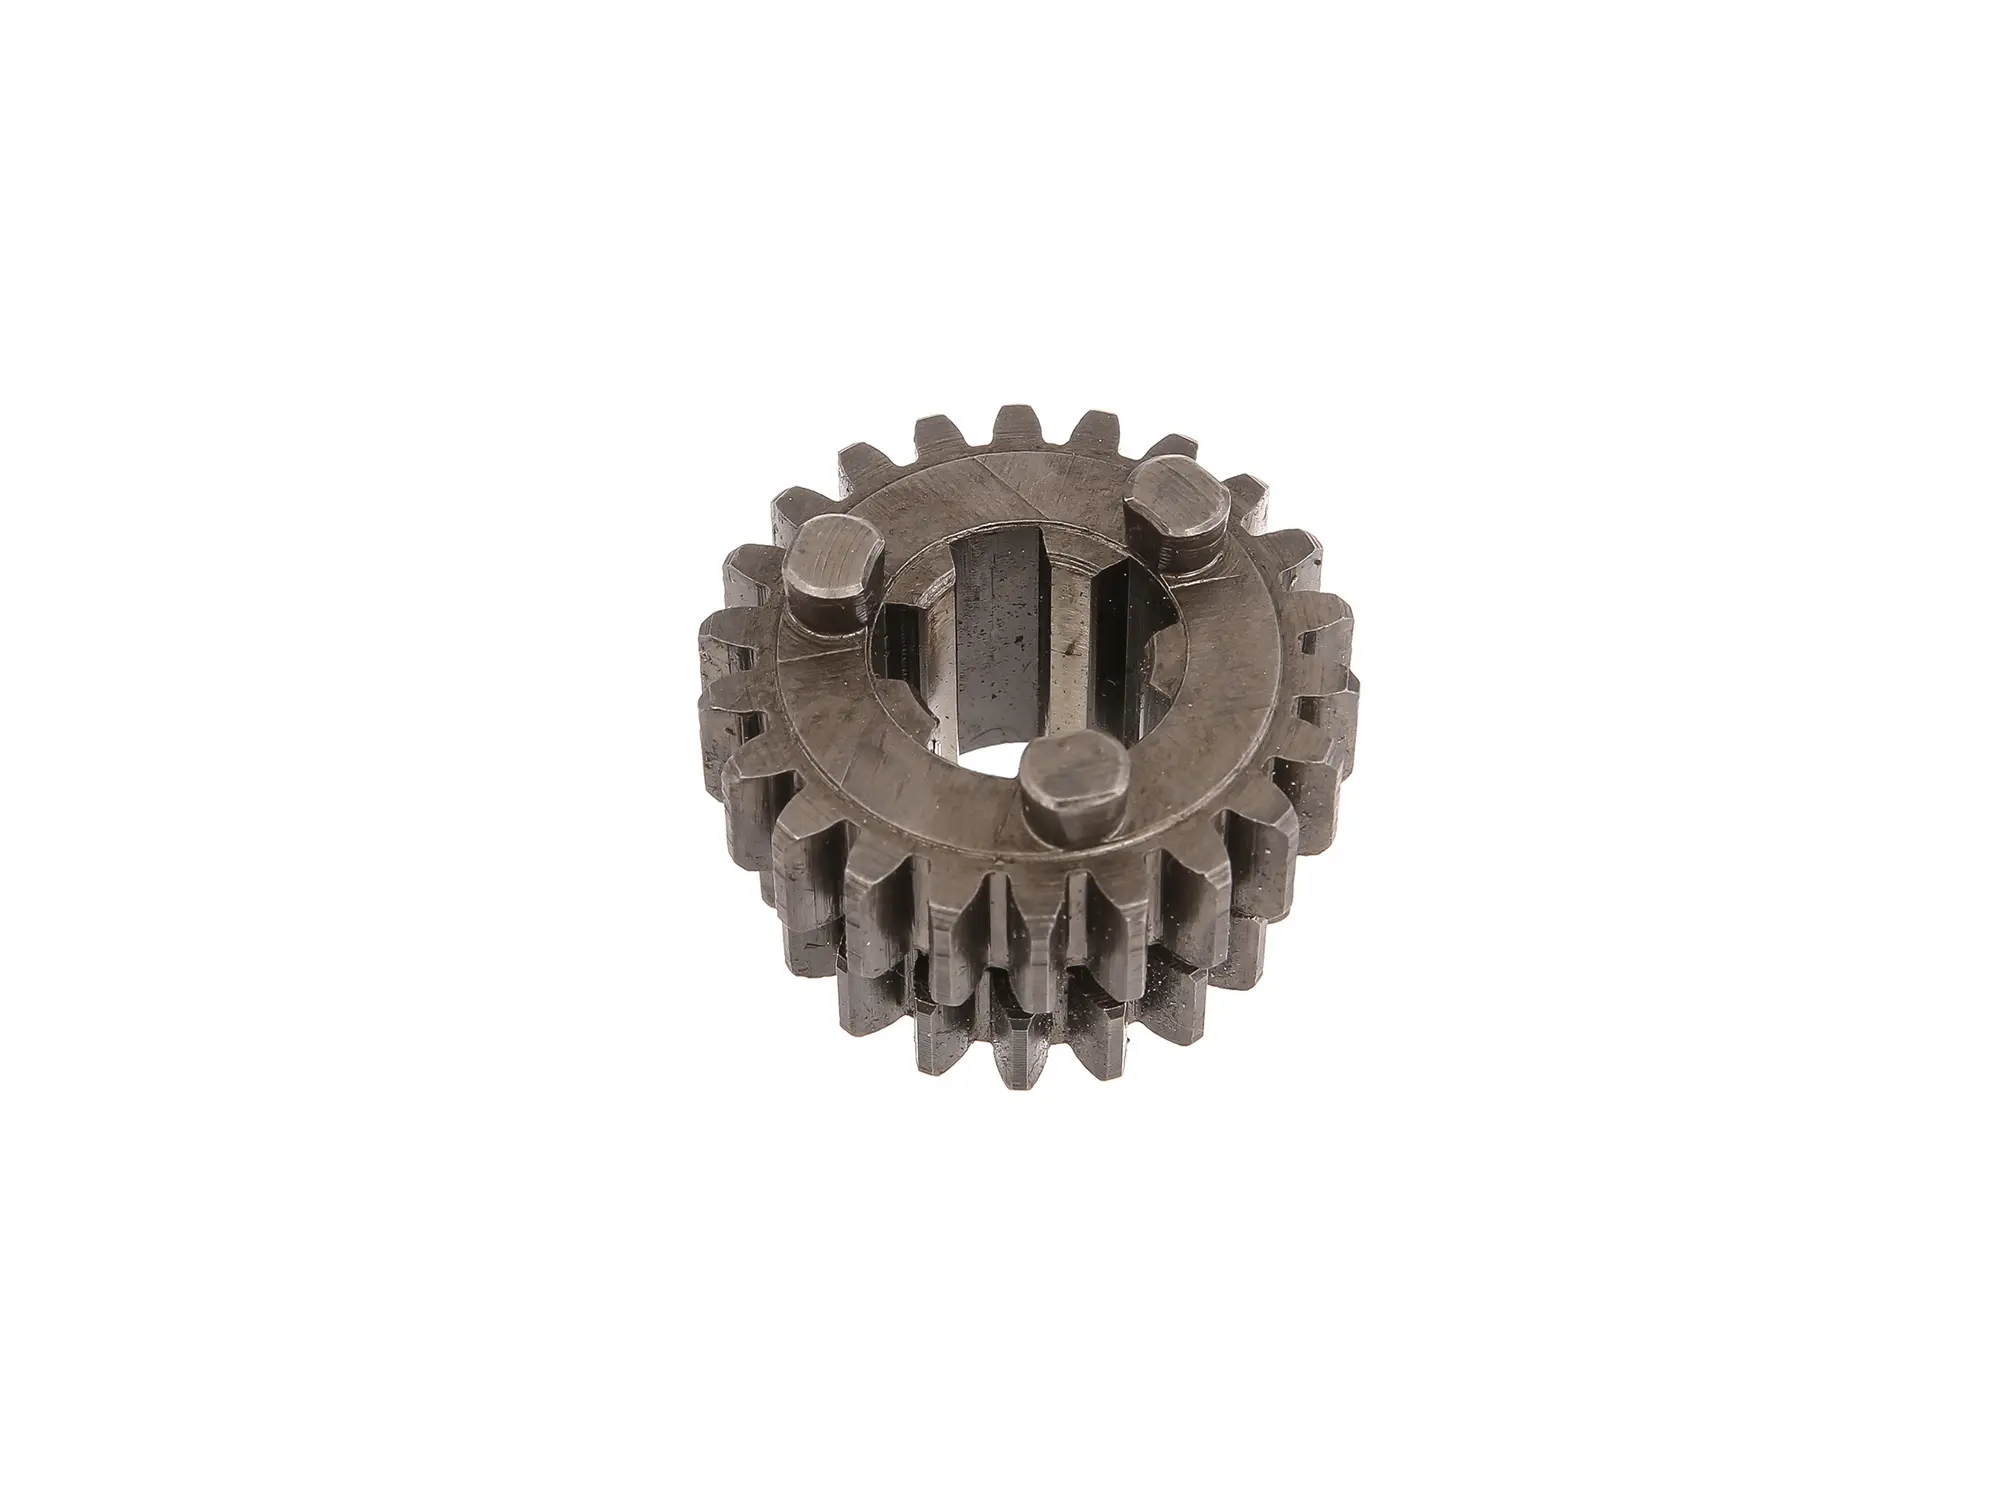 18-tooth ratchet wheel, 2nd and 4th gear - MZ ES125, ES150, ETS125, ETS150, TS125, TS150, RT125/3 - IWL TR150 Troll, Item no: 10005209 - Image 1